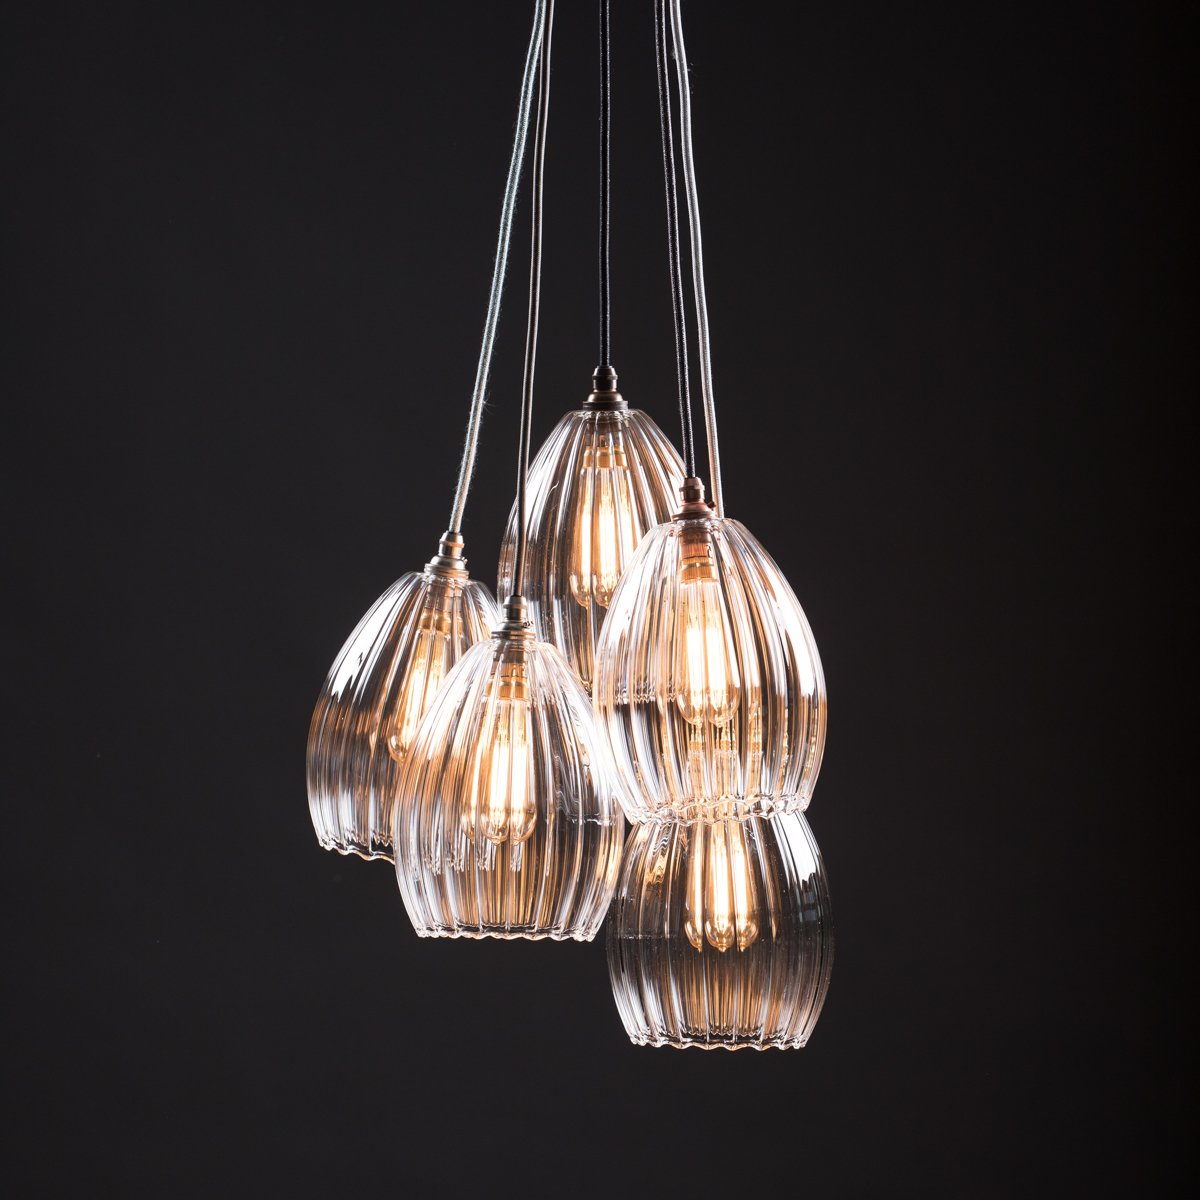 Molly Mid 5 Way Cluster glass pendant light